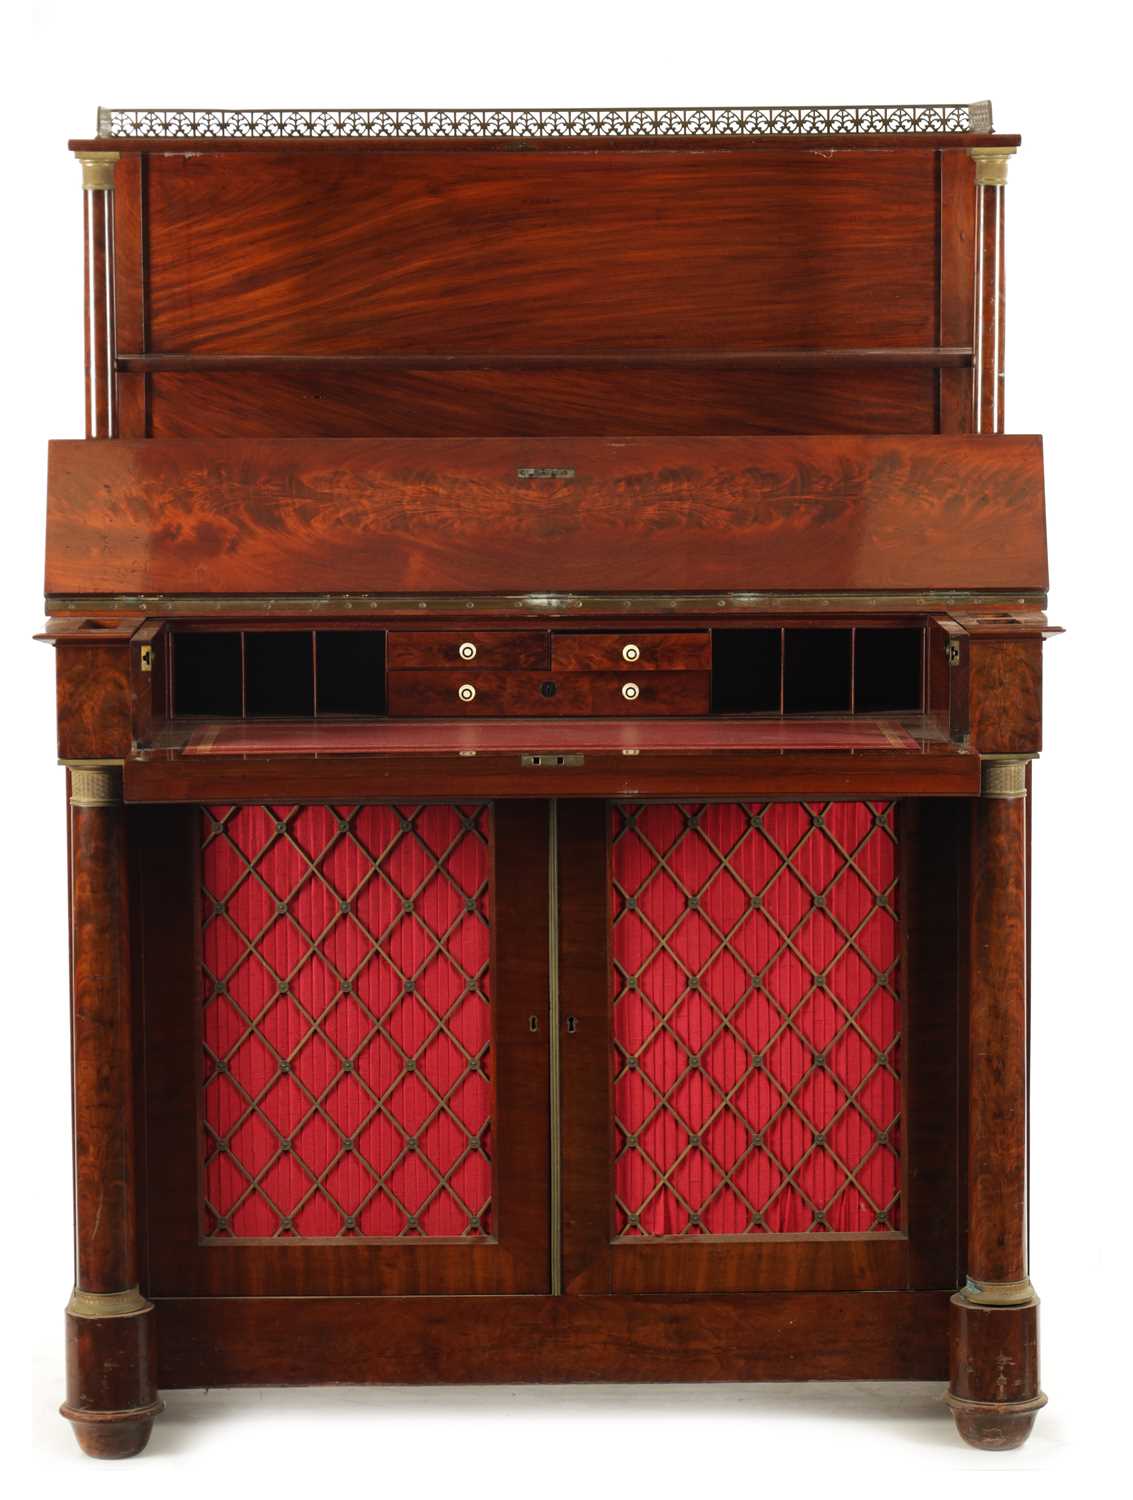 A GOOD REGENCY FRENCH EMPIRE FIGURED MAHOGANY SECRETAIRE SIDE CABINET - Image 5 of 10